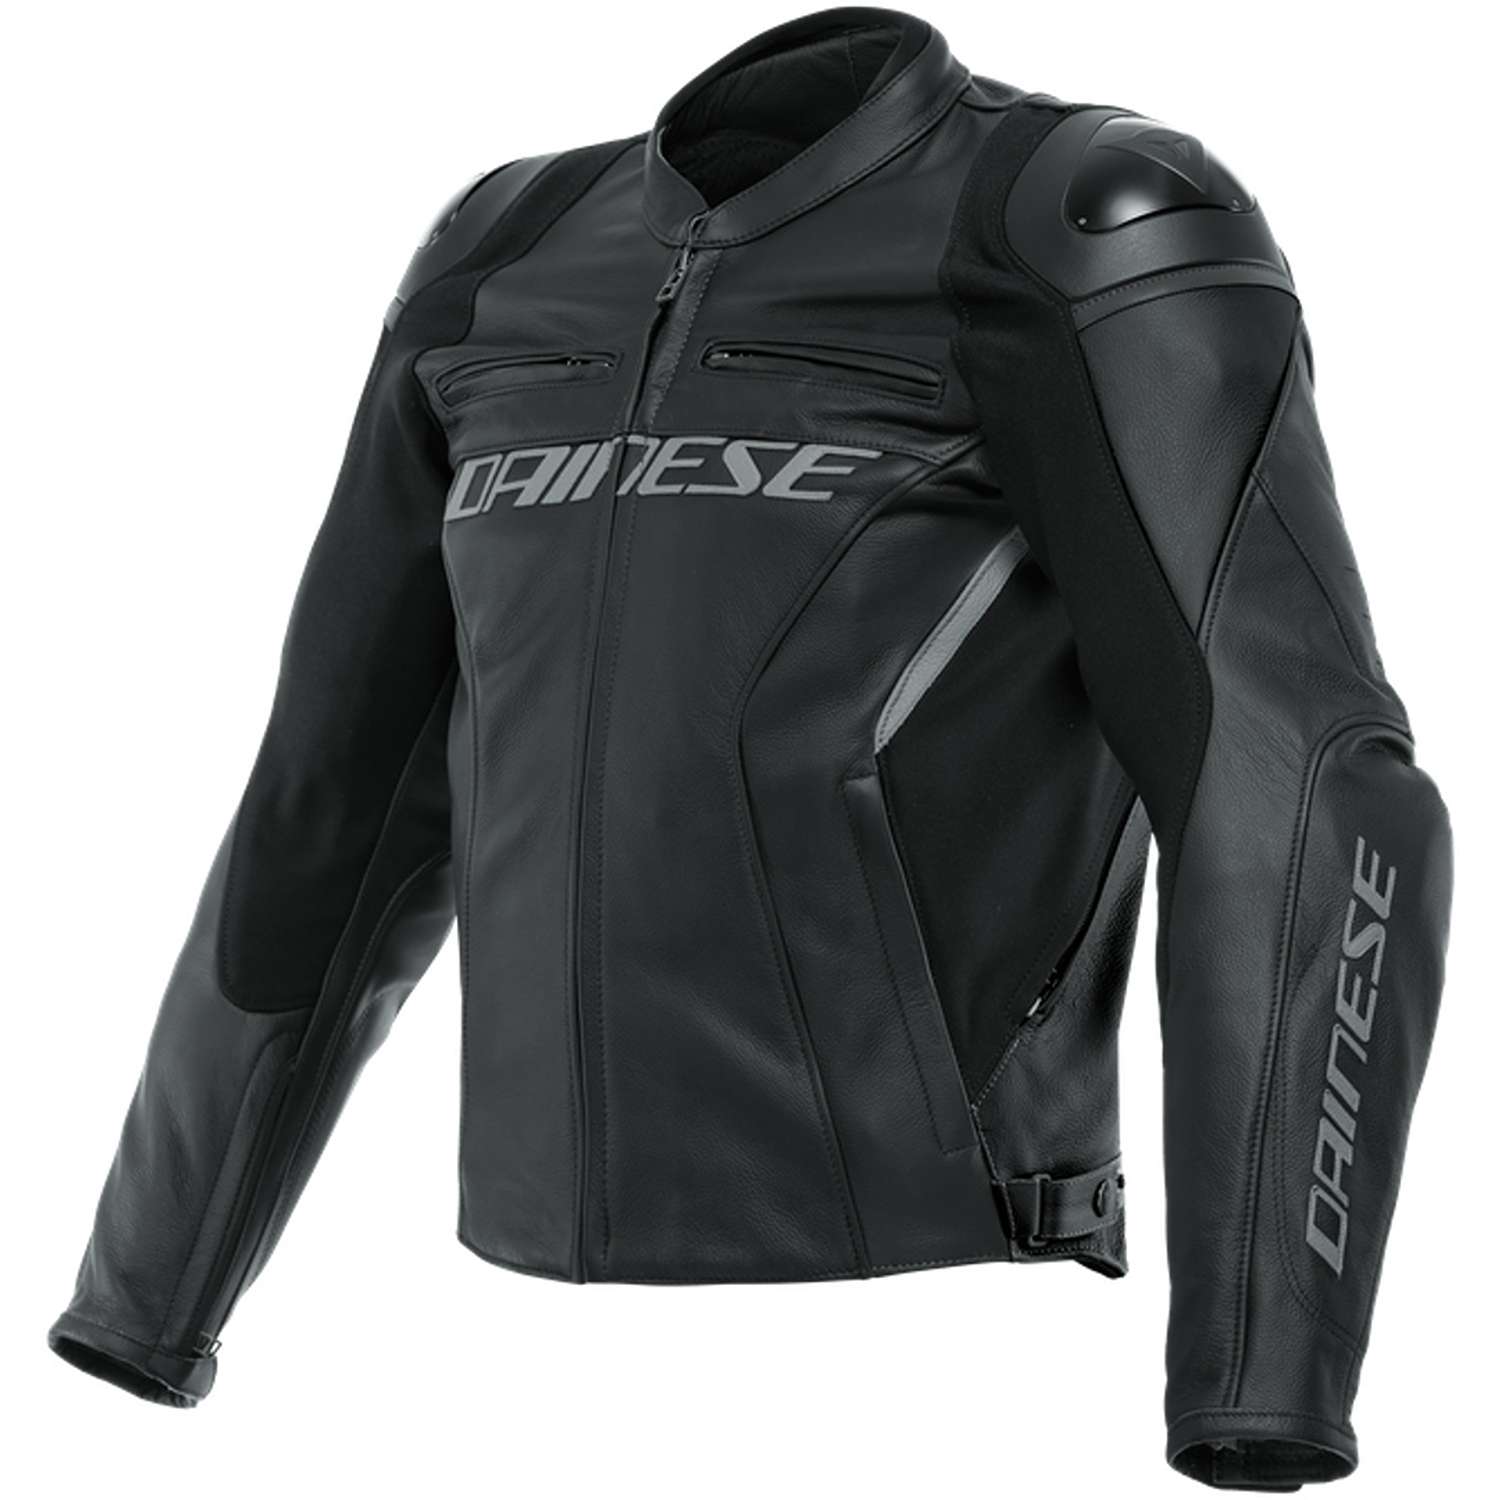 Image of EU Dainese Racing 4 Leather Jacket S/T Black Black Taille 27